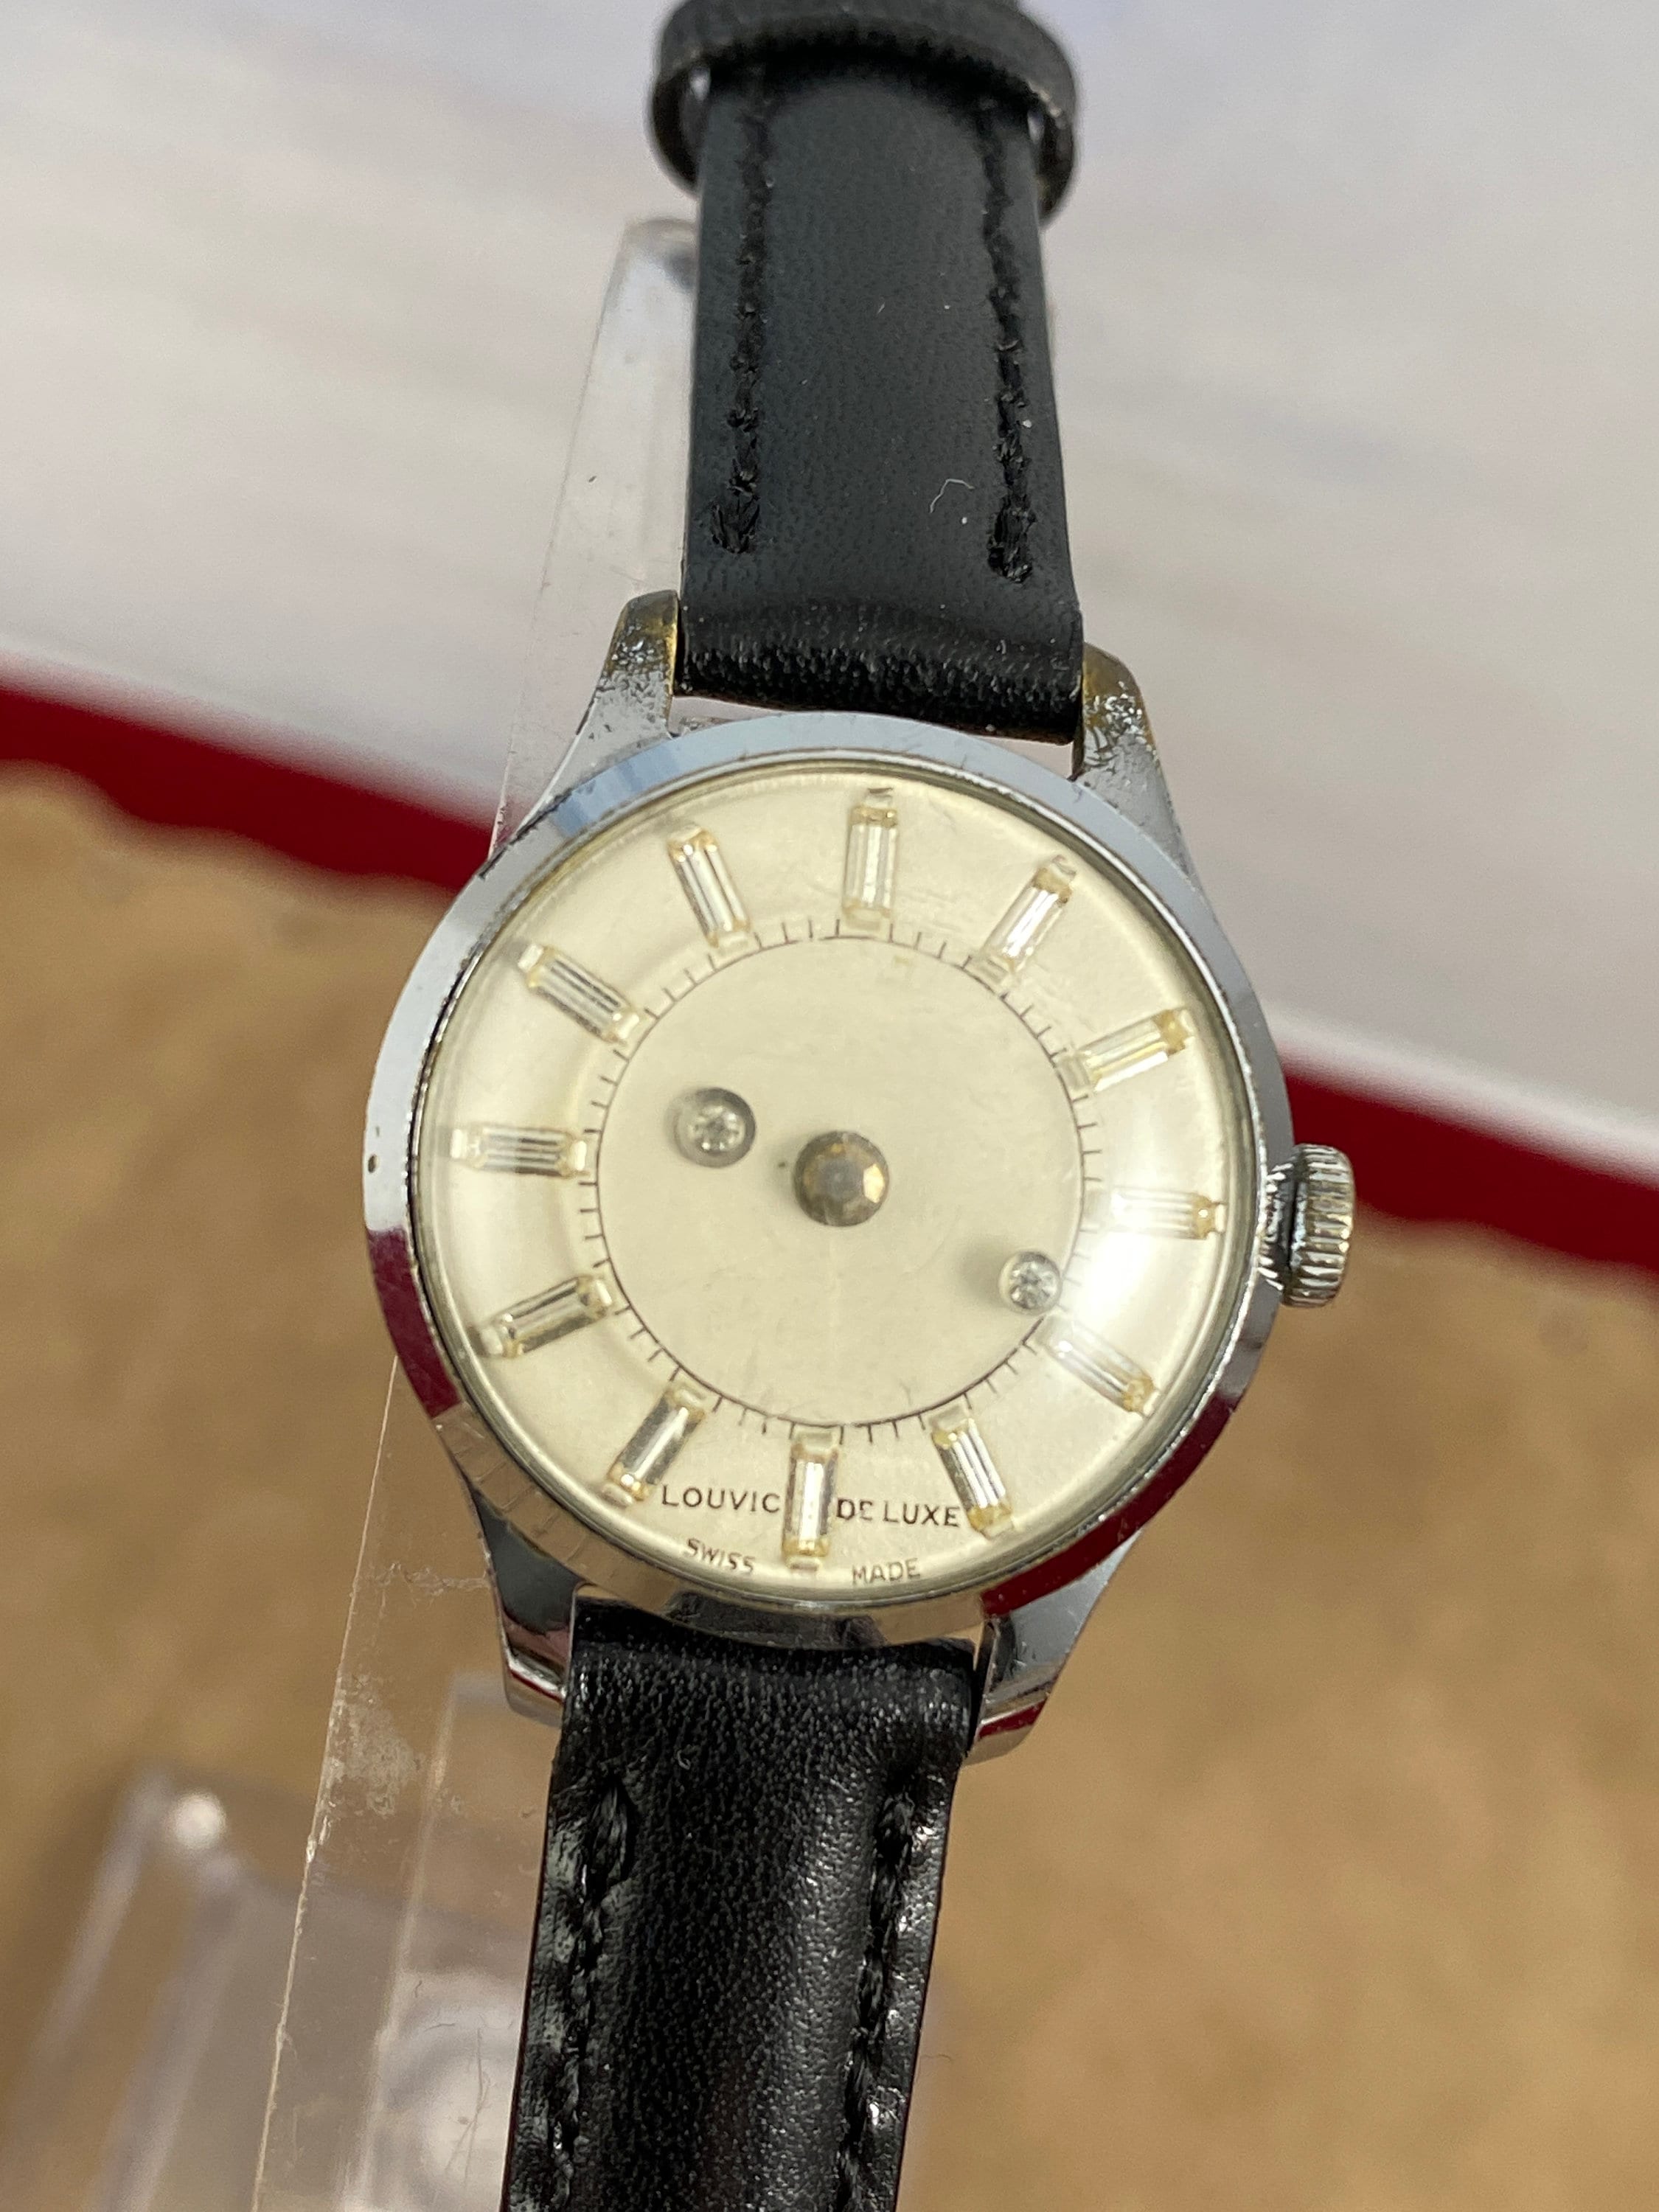 1960s Vintage Stainless Steel Jacoby Bender JB Champion USA band — Avocado  Vintage Watches